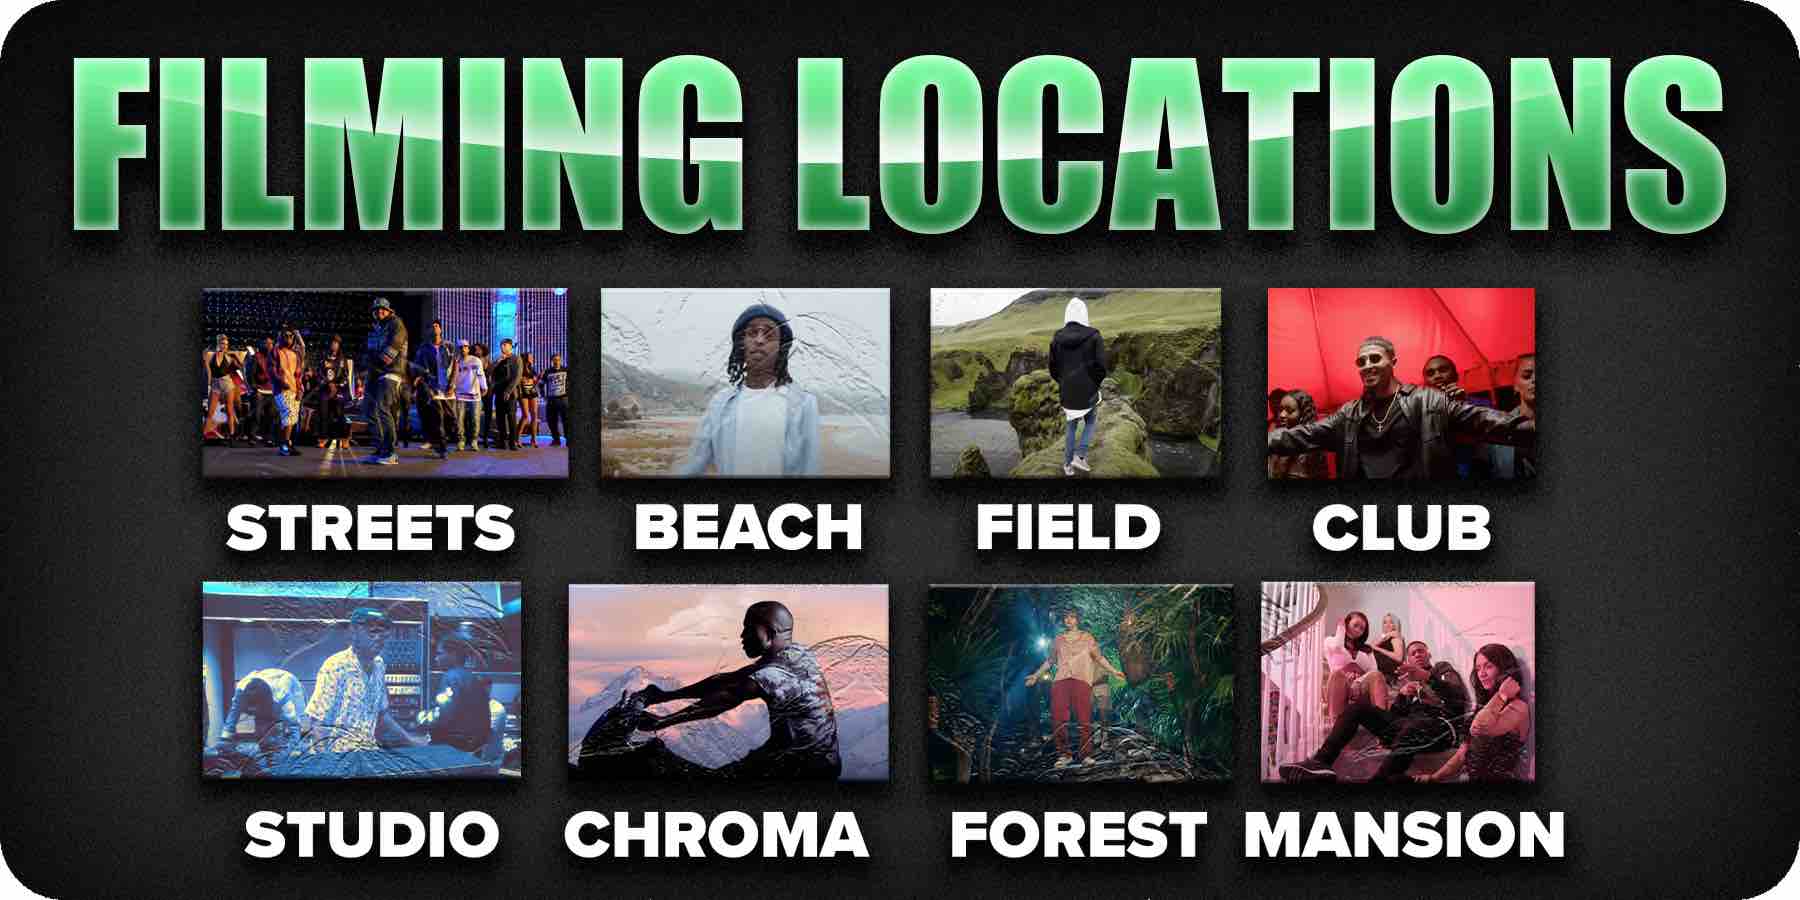 Filming Locations